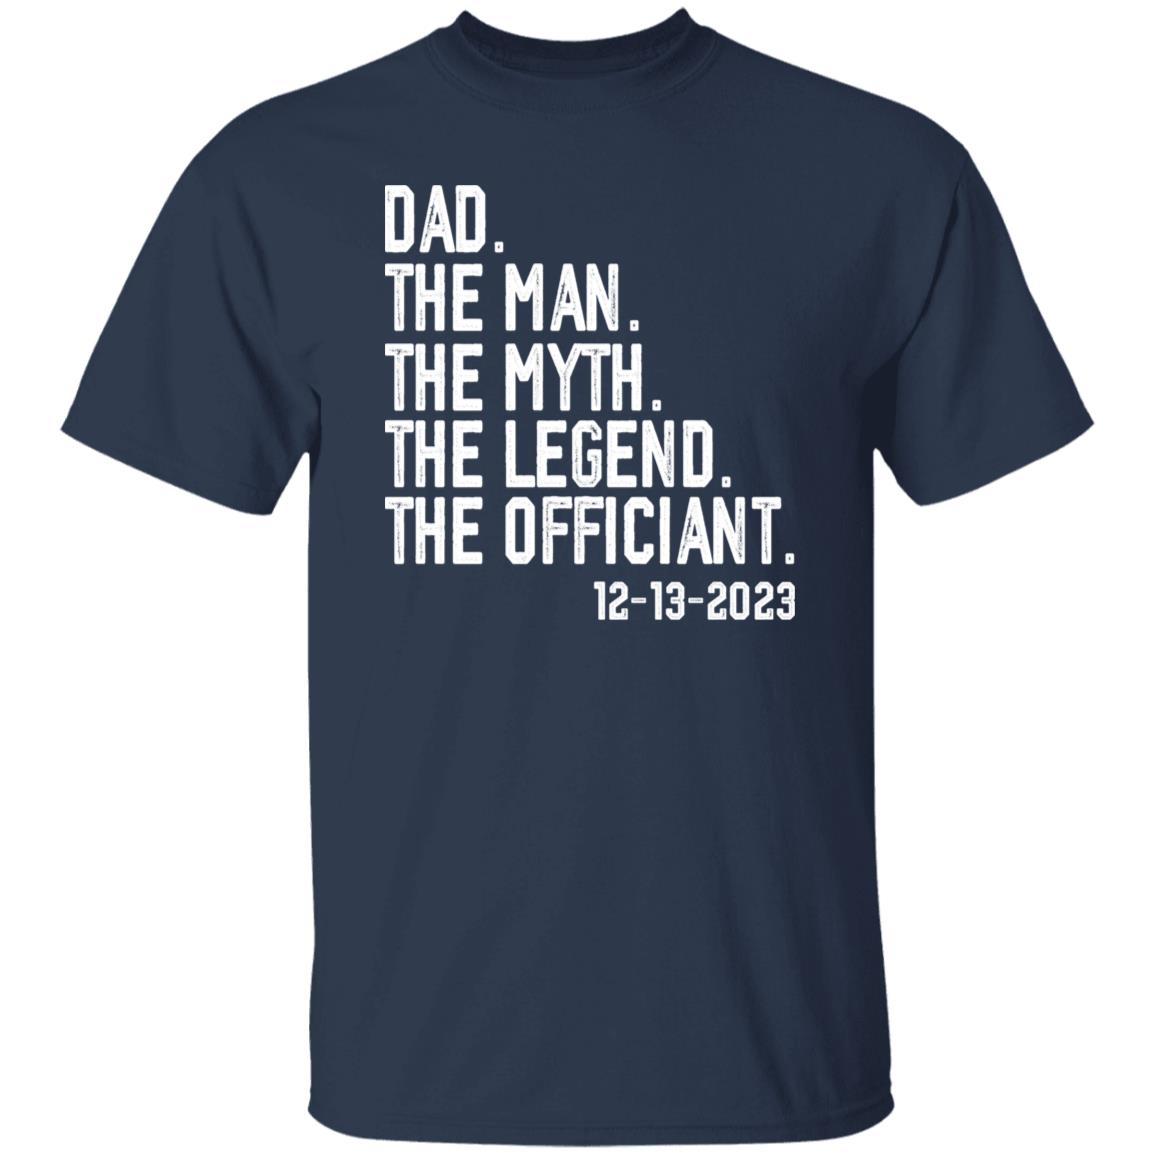 Personalized Gift Shirt for Dad The Officiant The Man Myth Legend